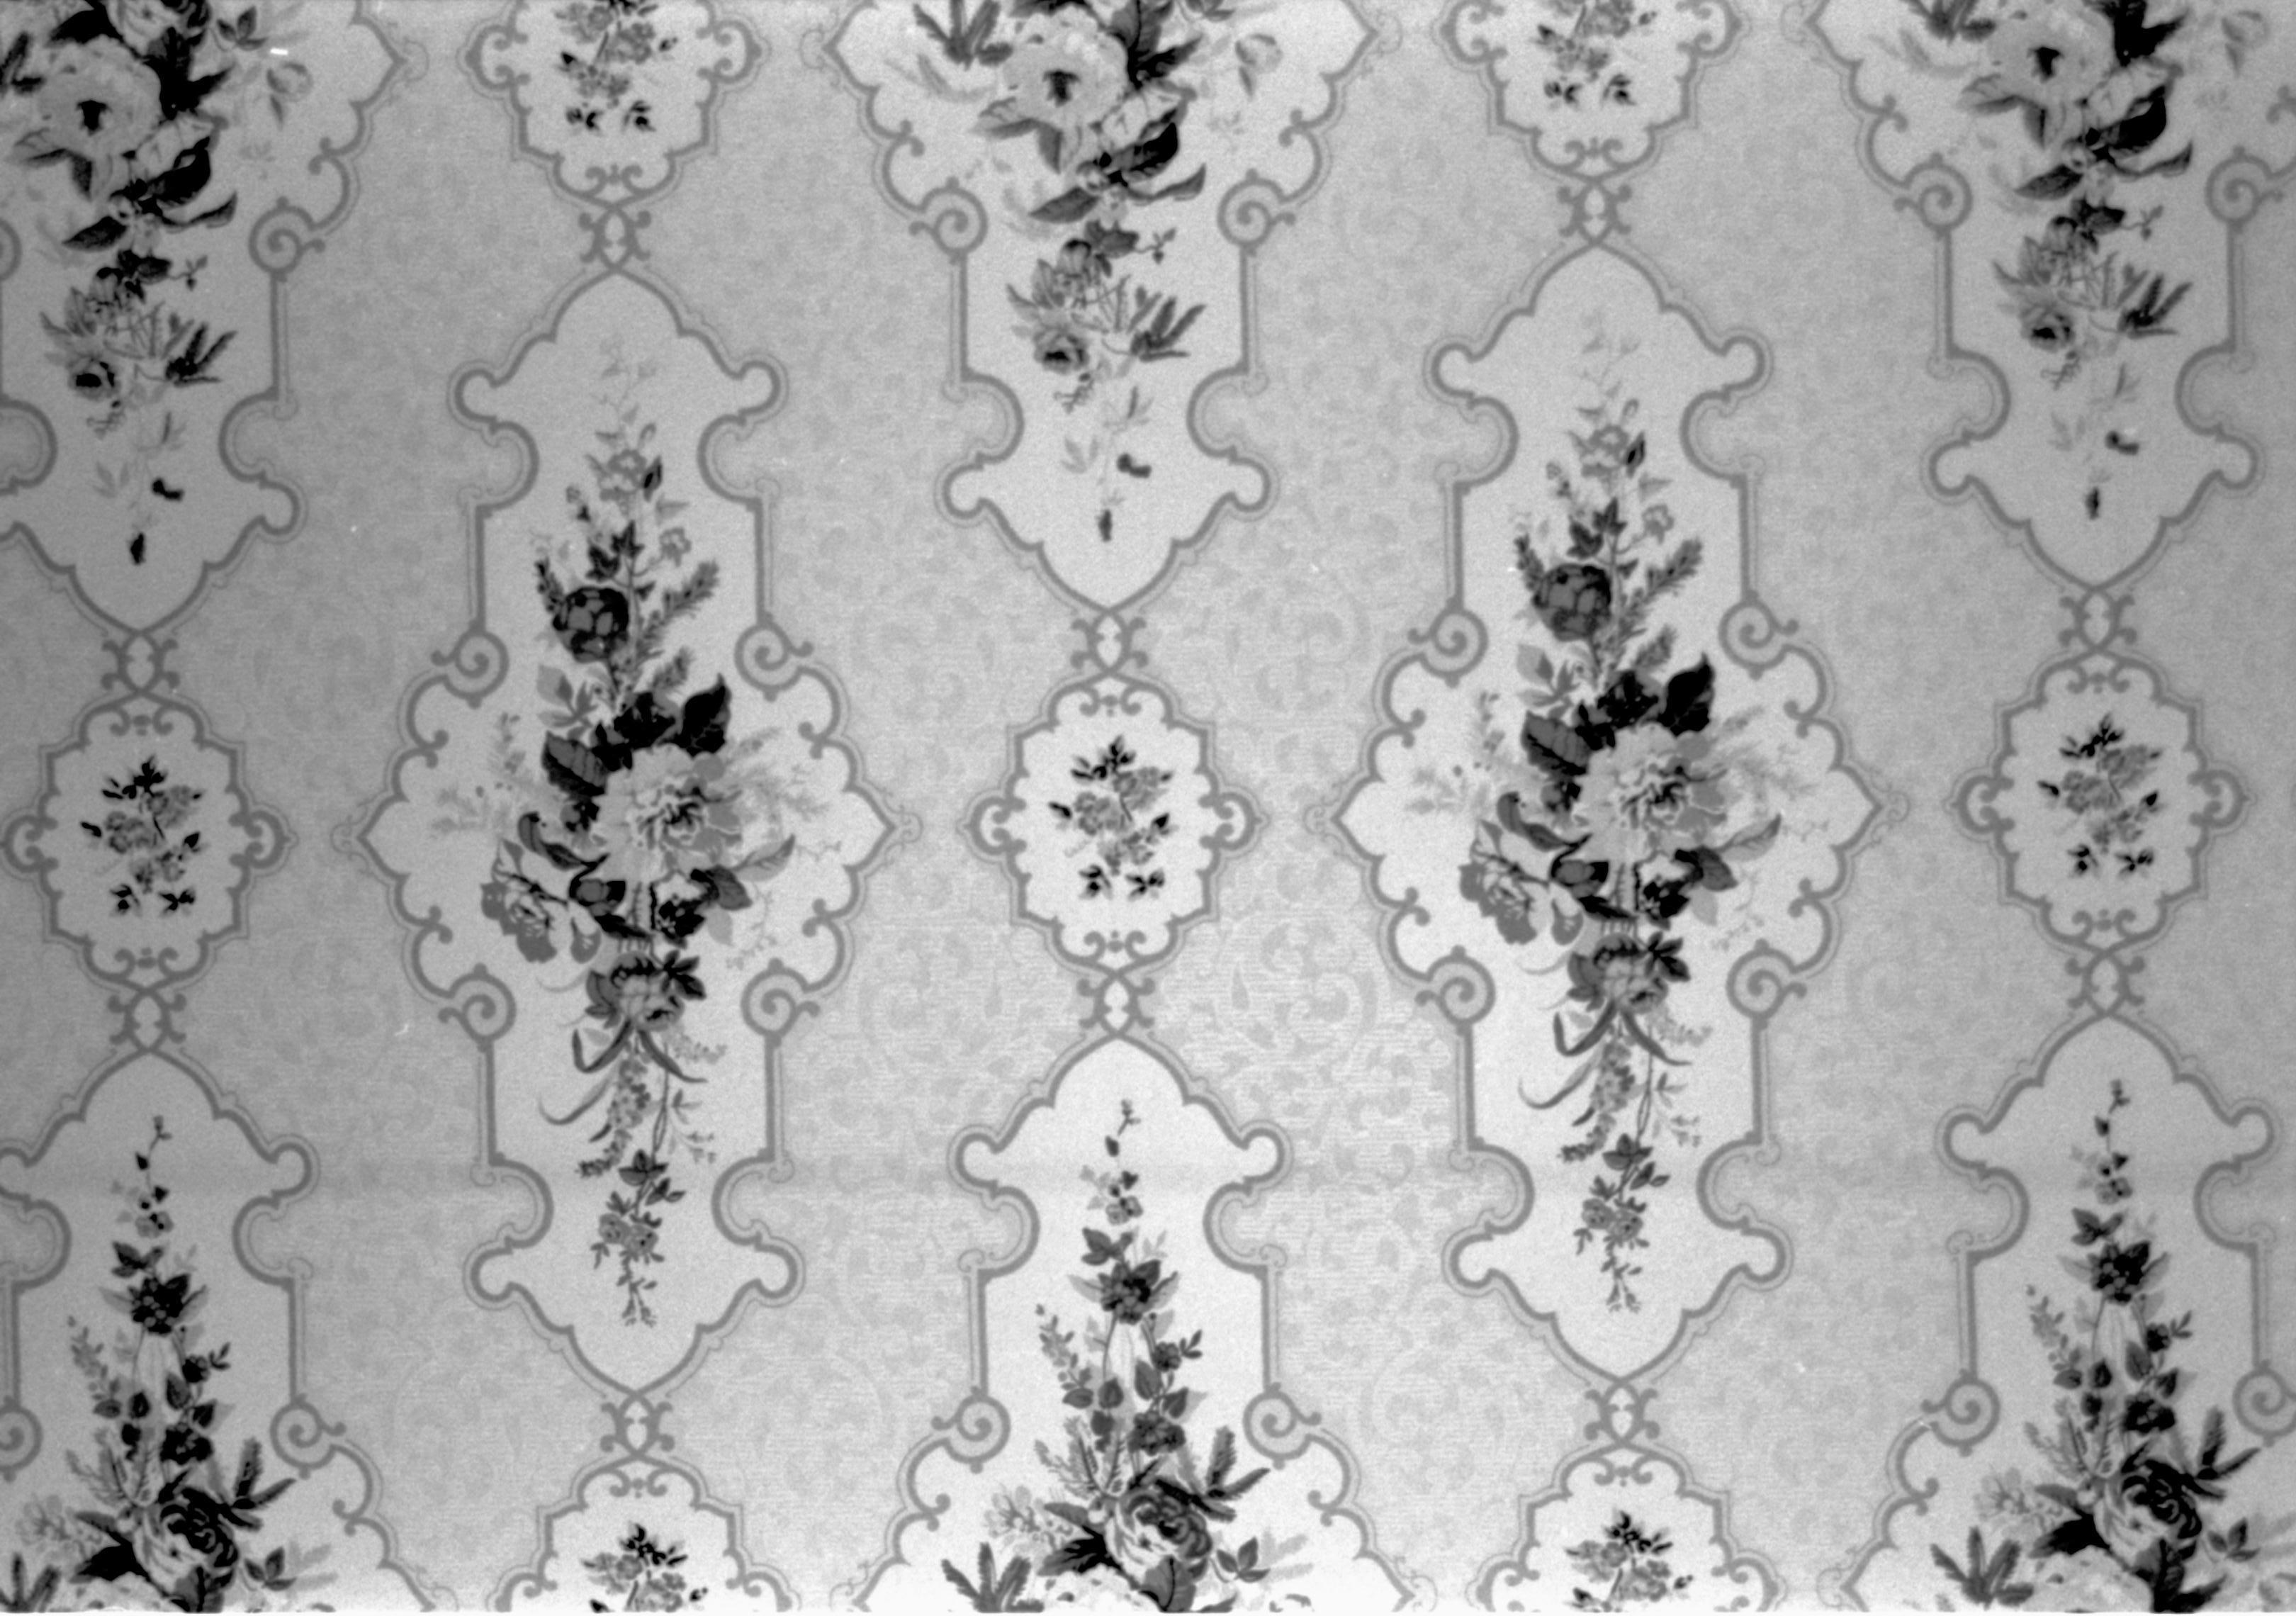 NA Lincoln Home NHS, investigation of wall paper investigation, wall paper